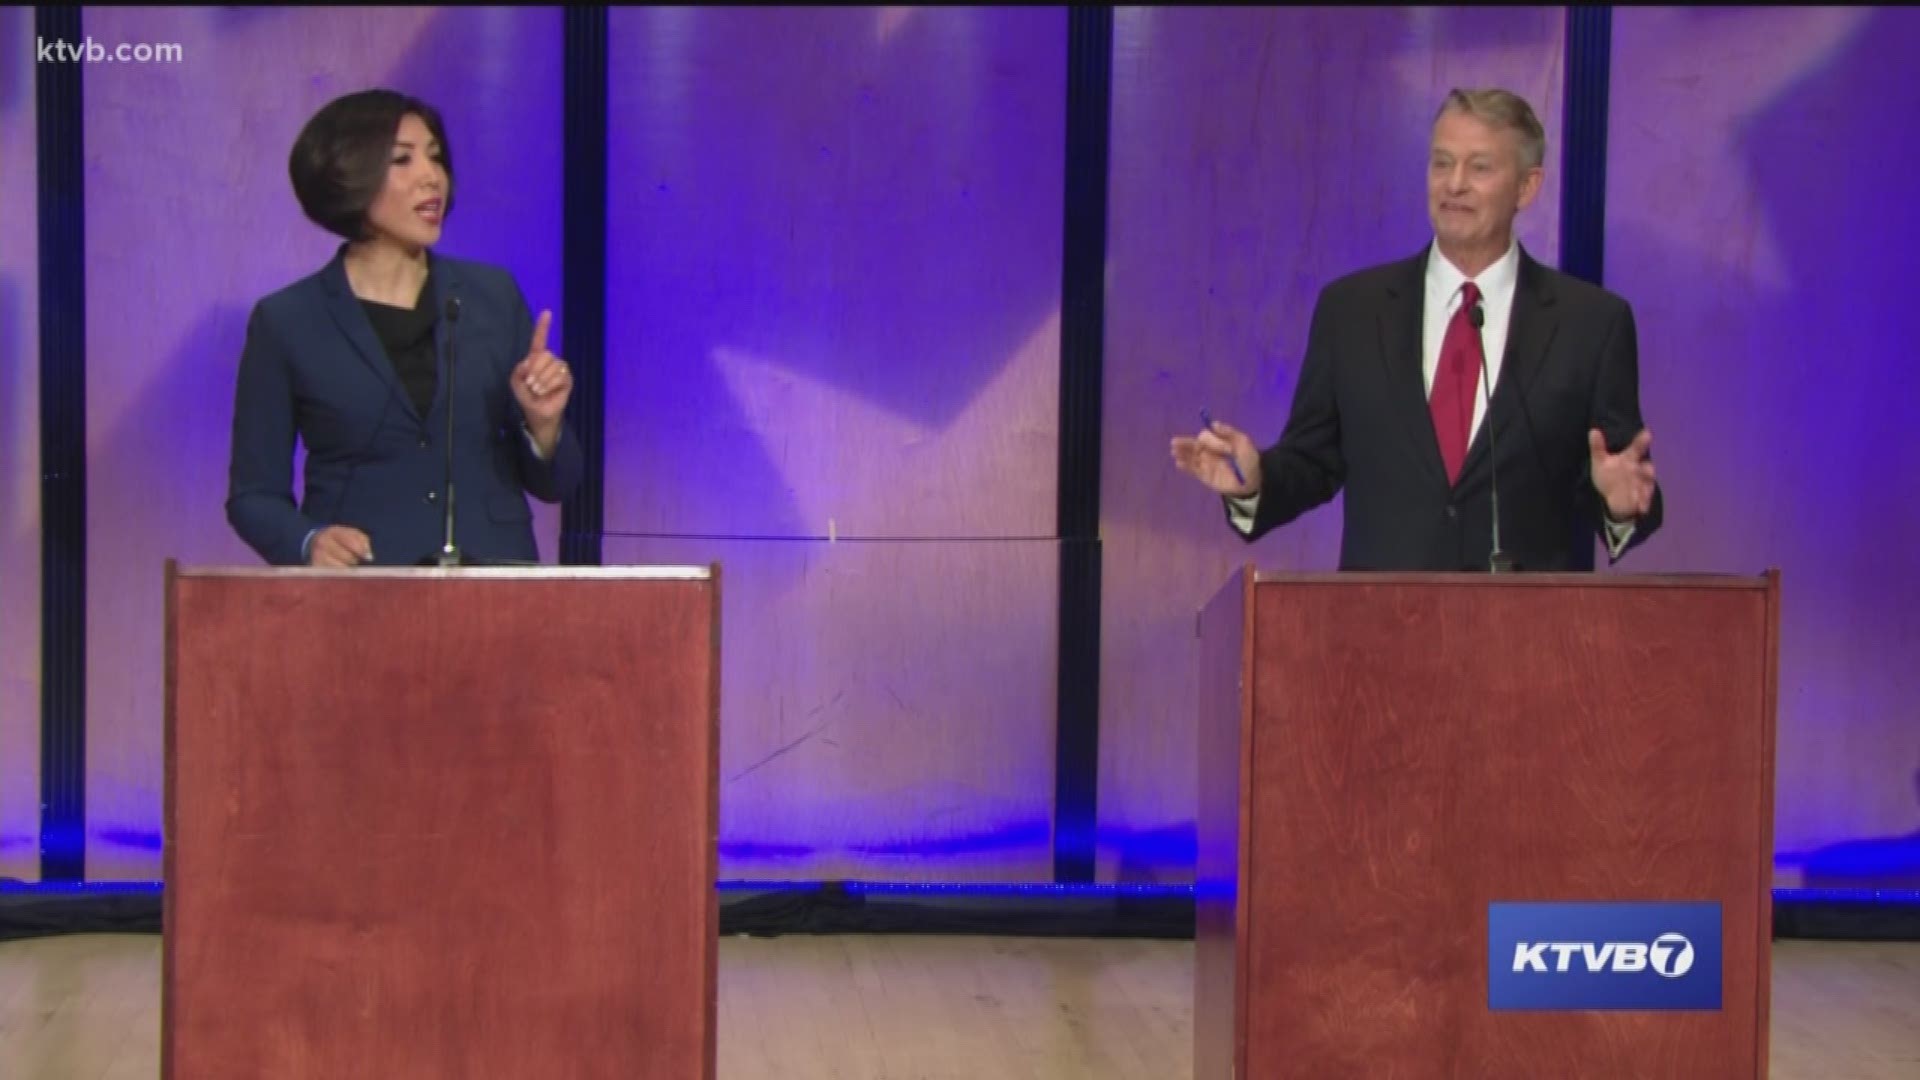 The two candidates squared off in a live televised debate Monday at Northwest Nazarene University.